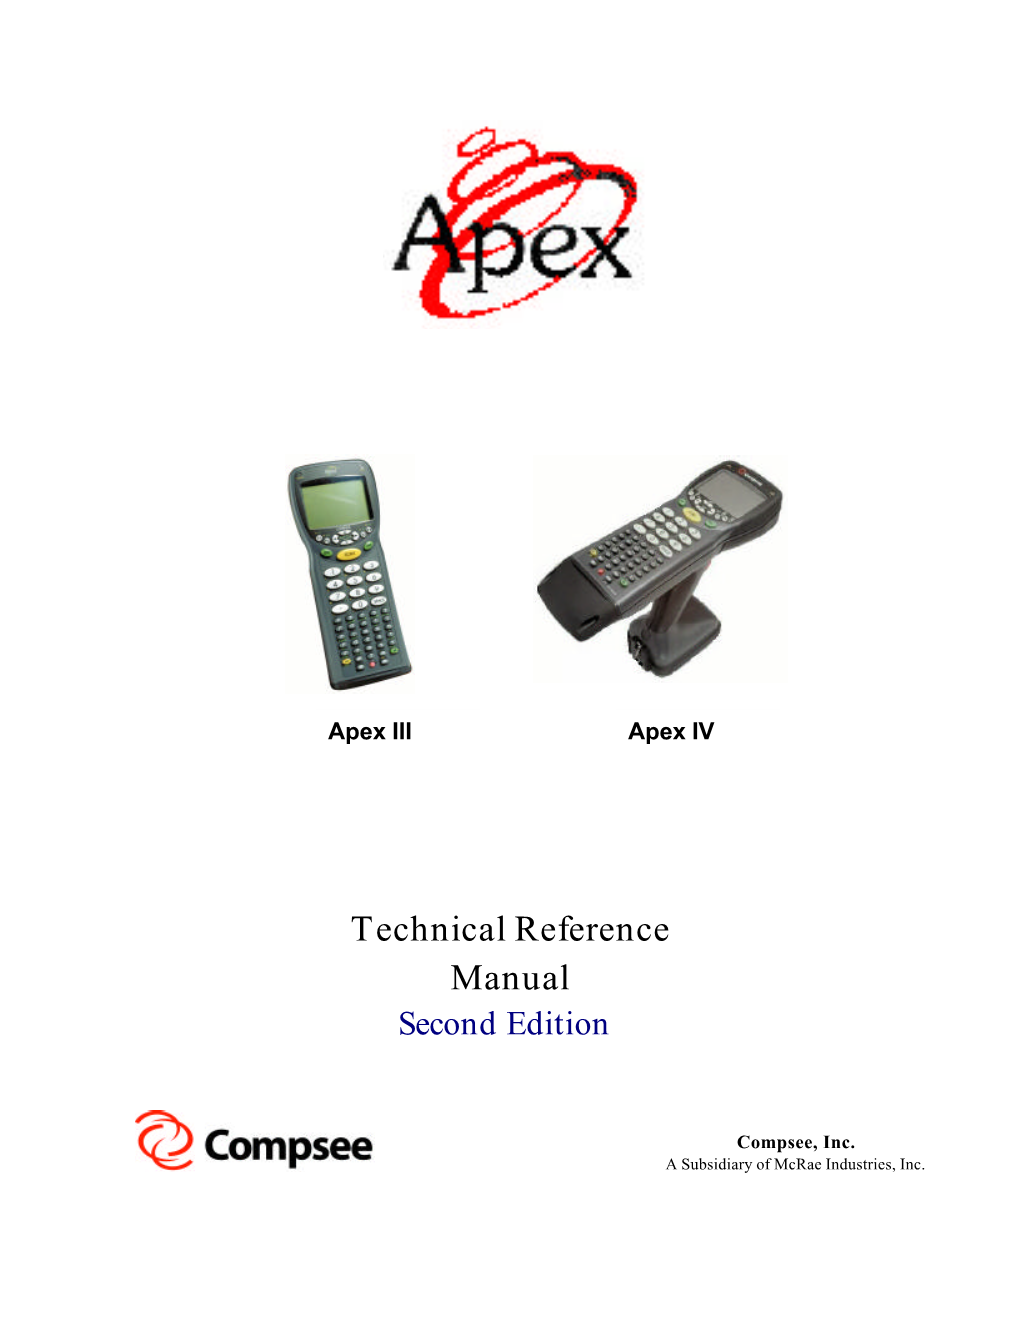 Technical Reference Manual Second Edition